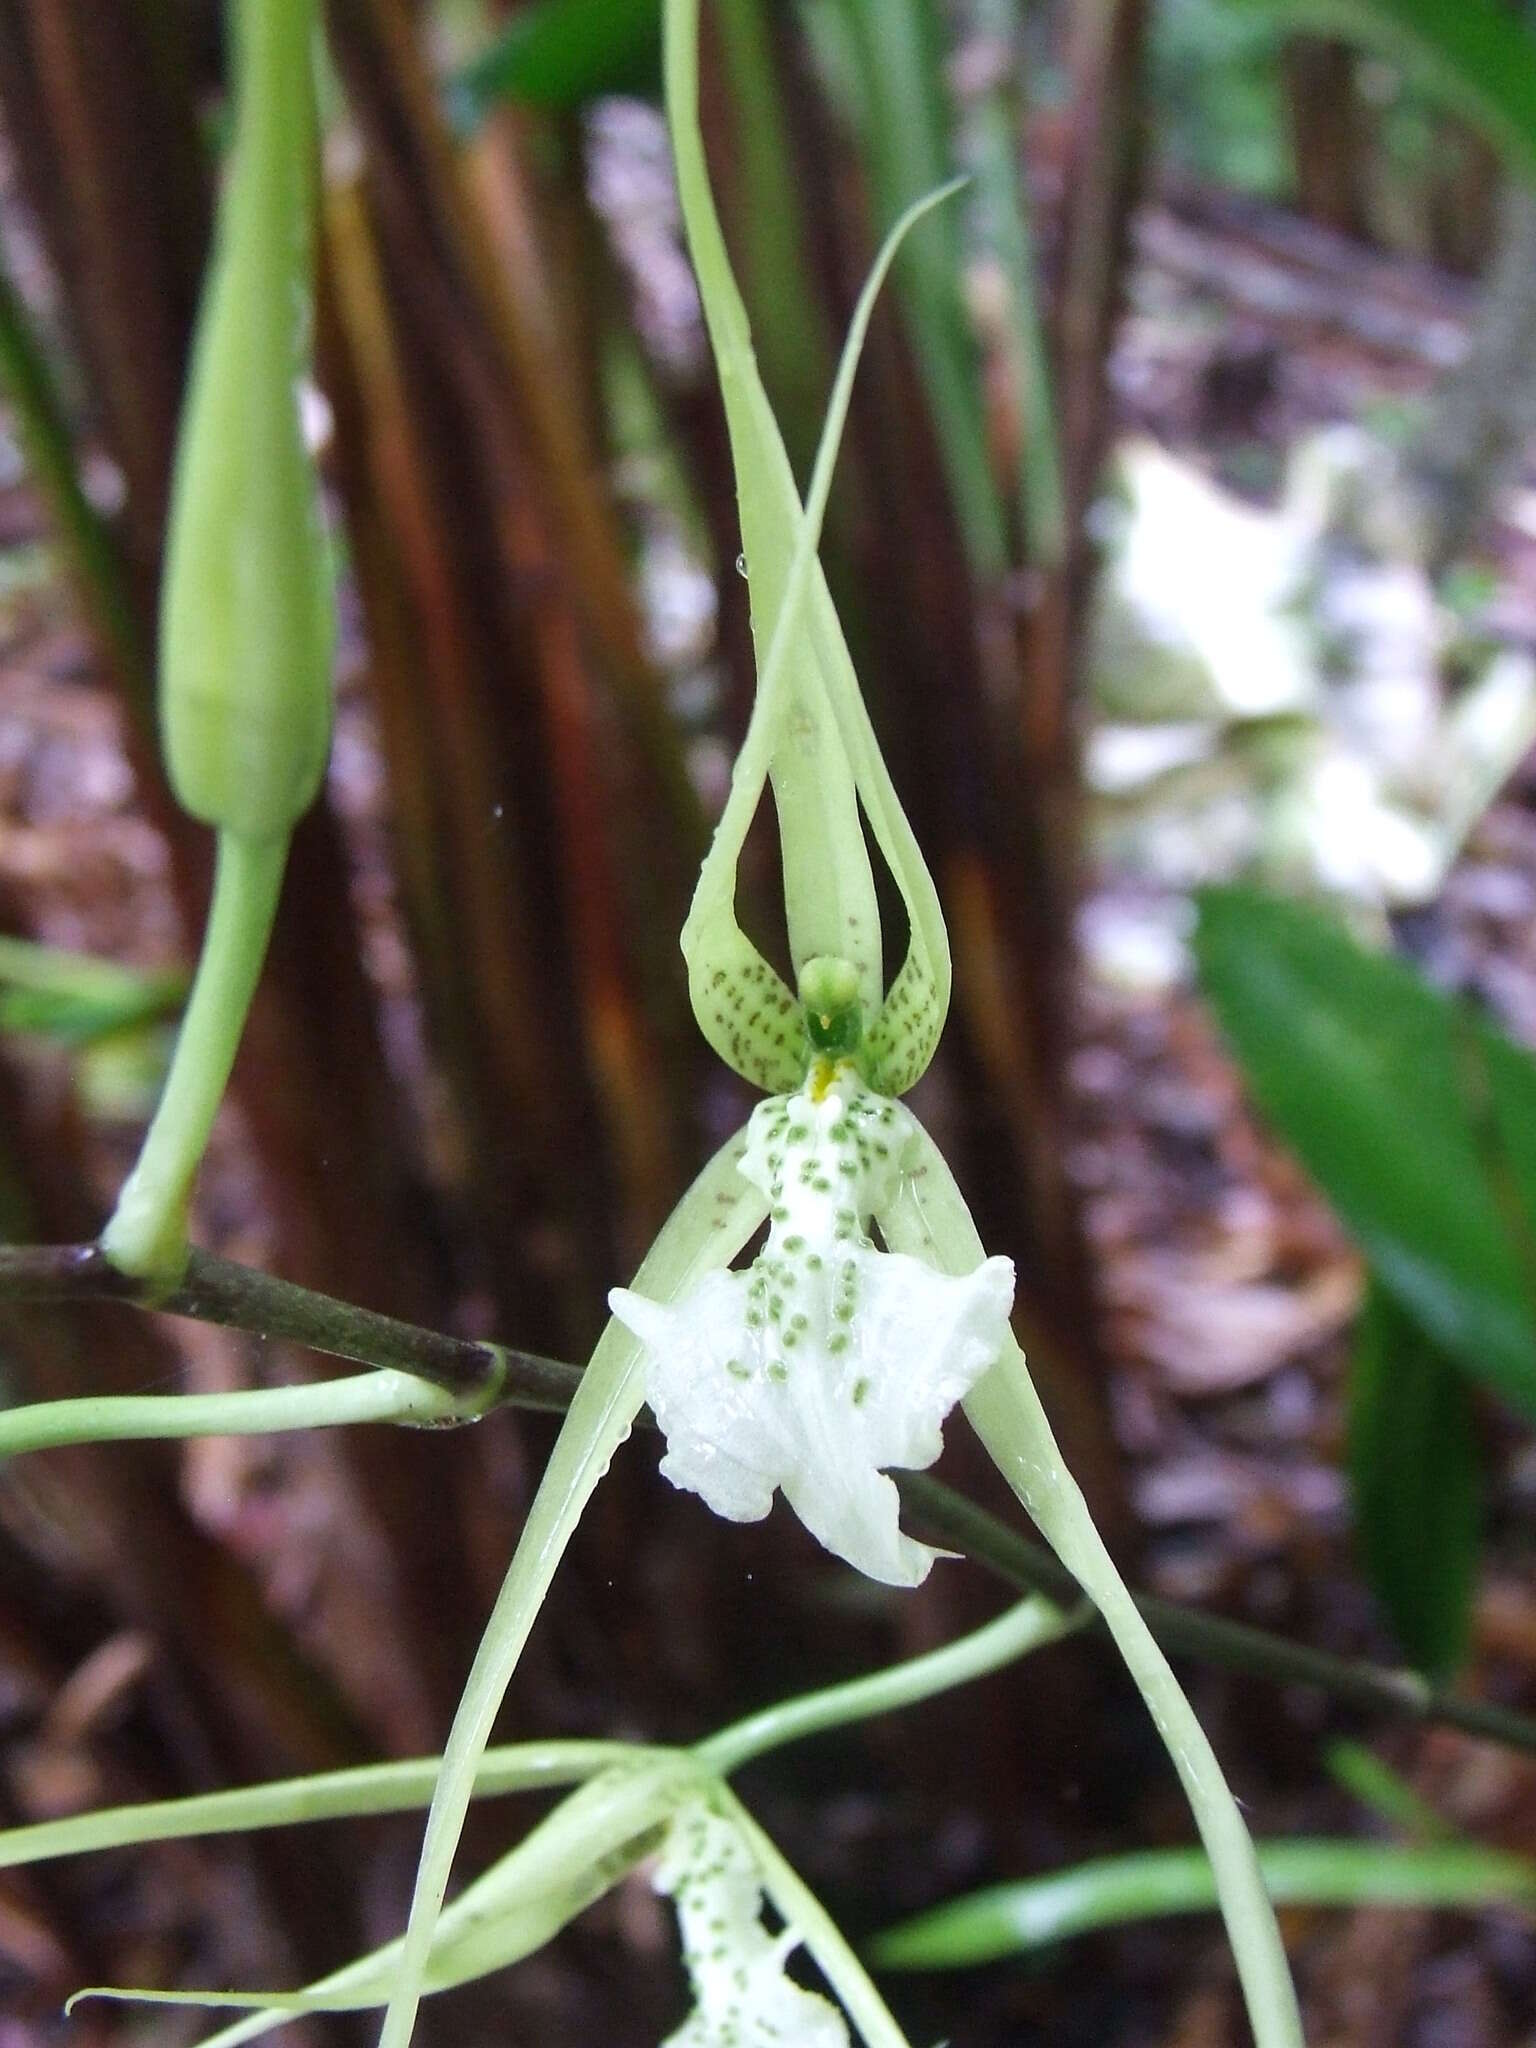 Image of Warty Brassia